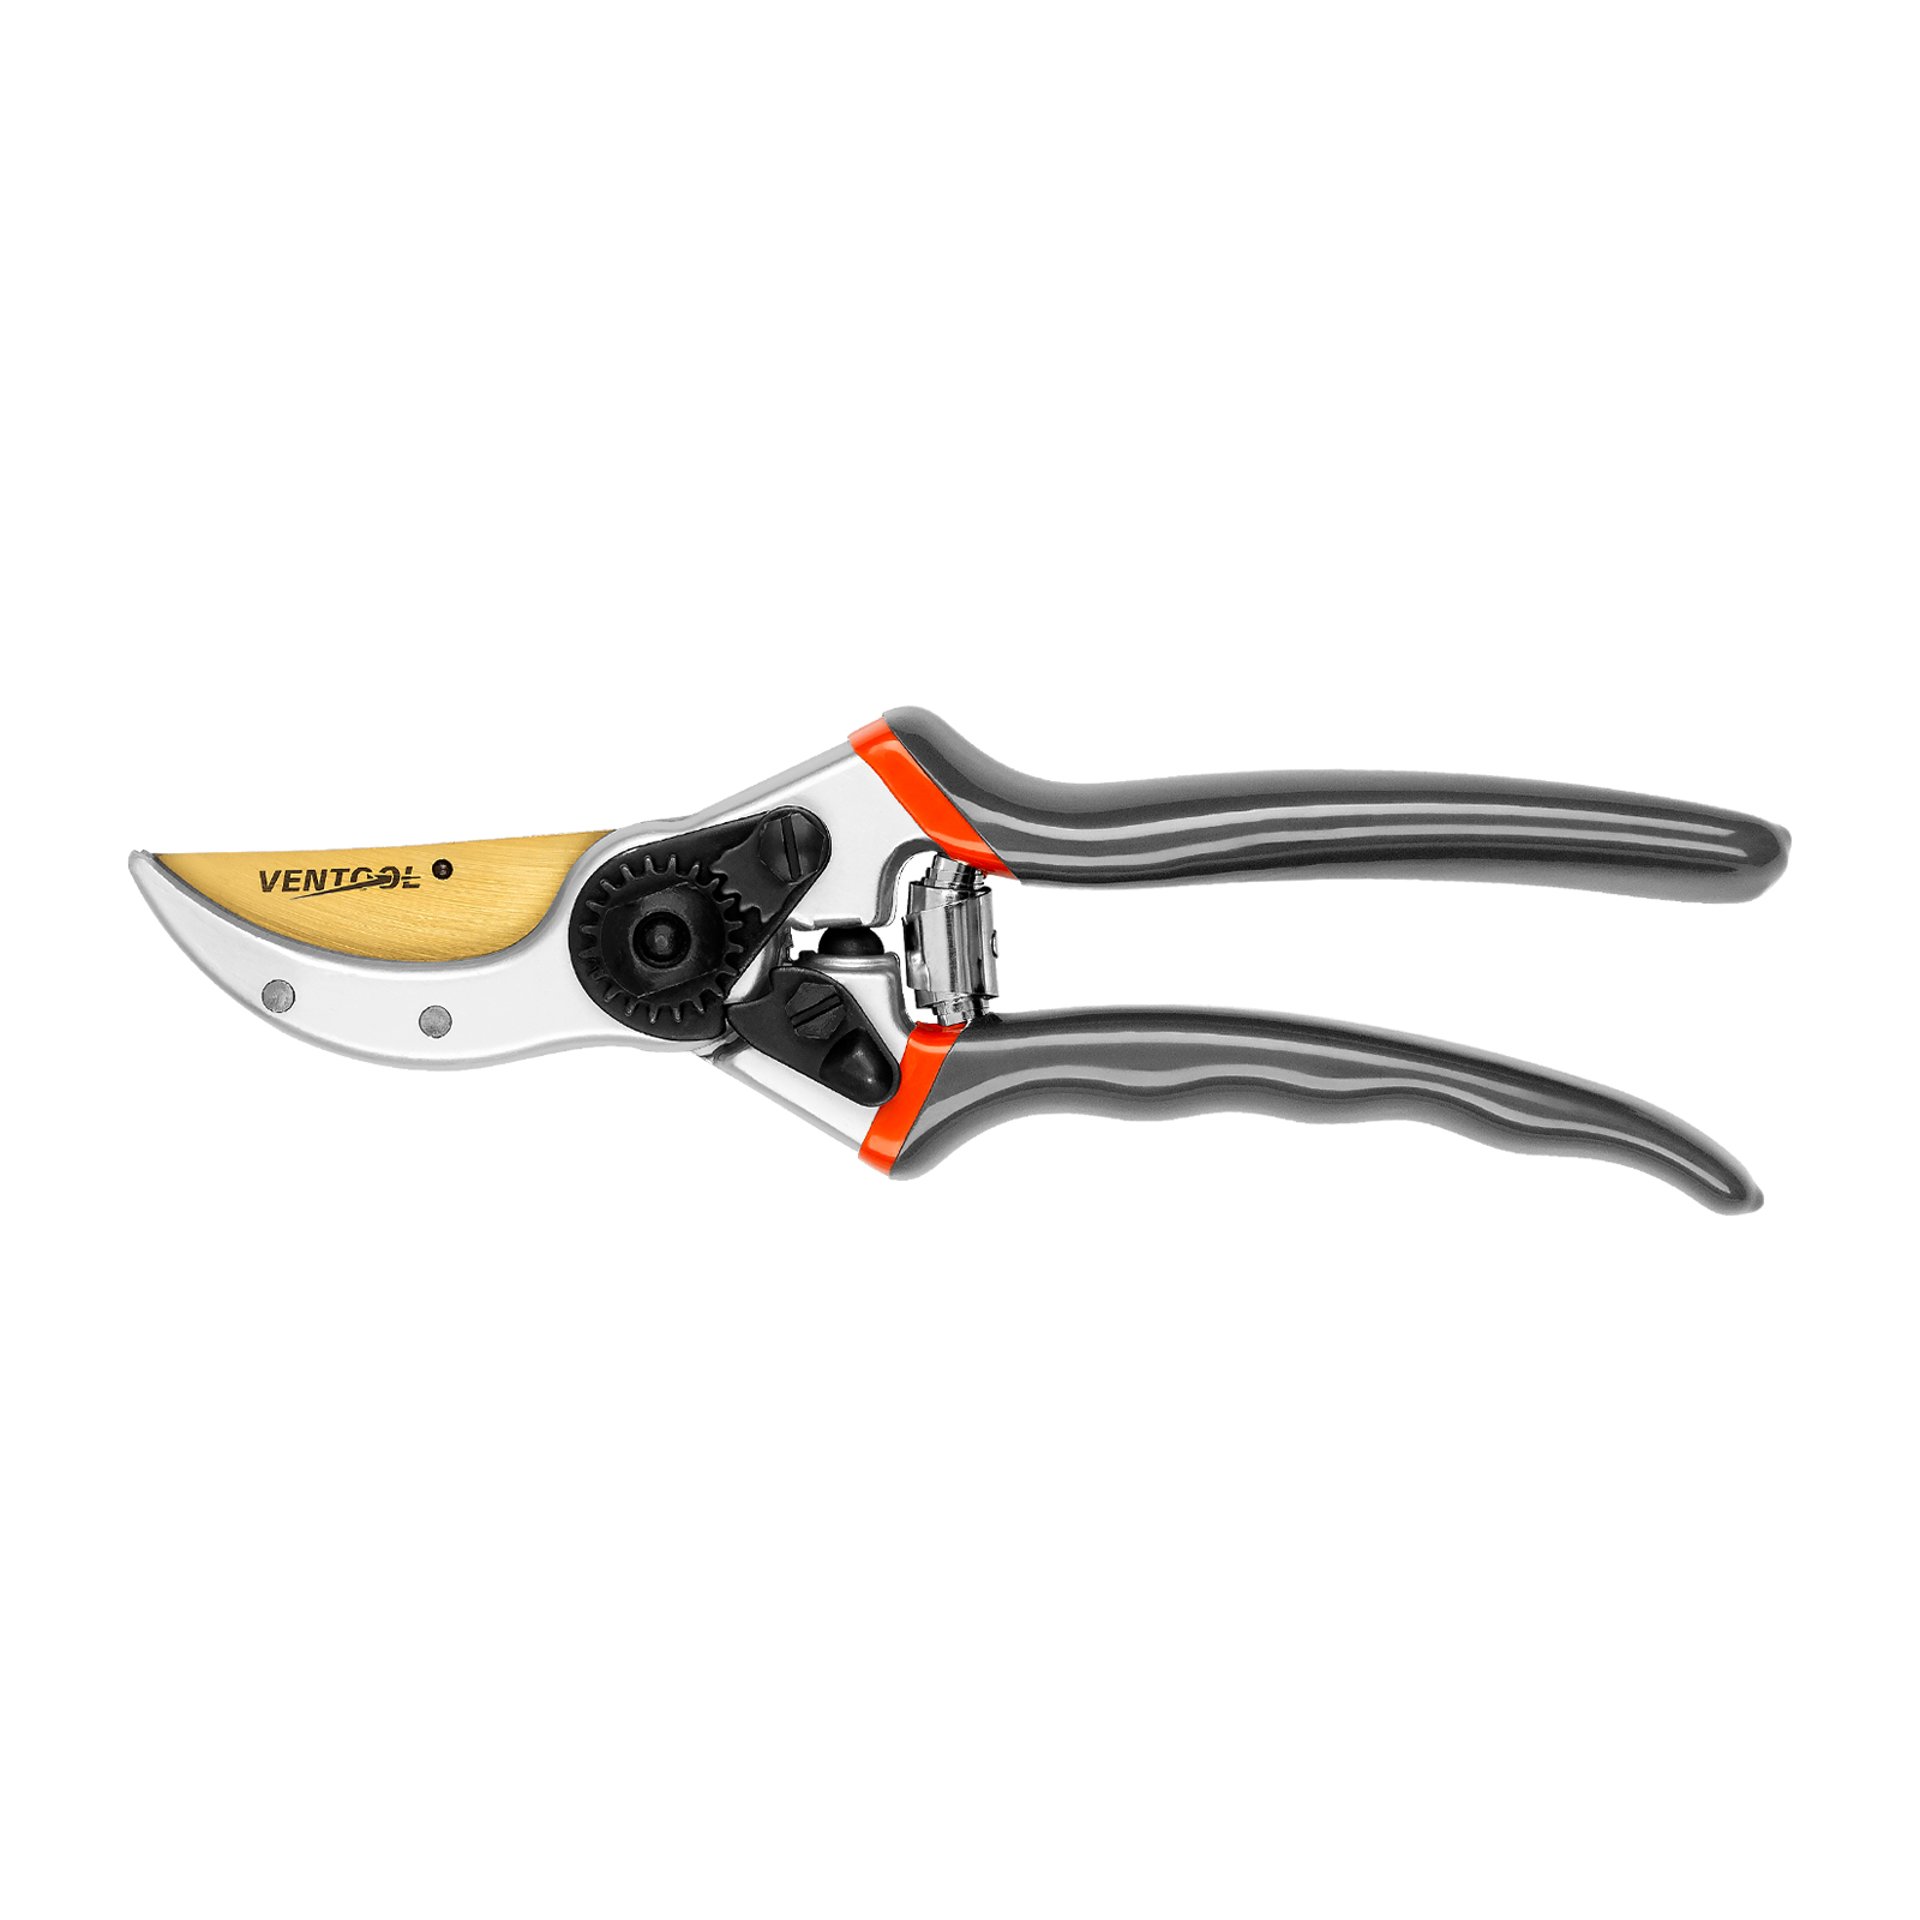 8" Bypass Pruning Shears with Ergonomic Concave Handles